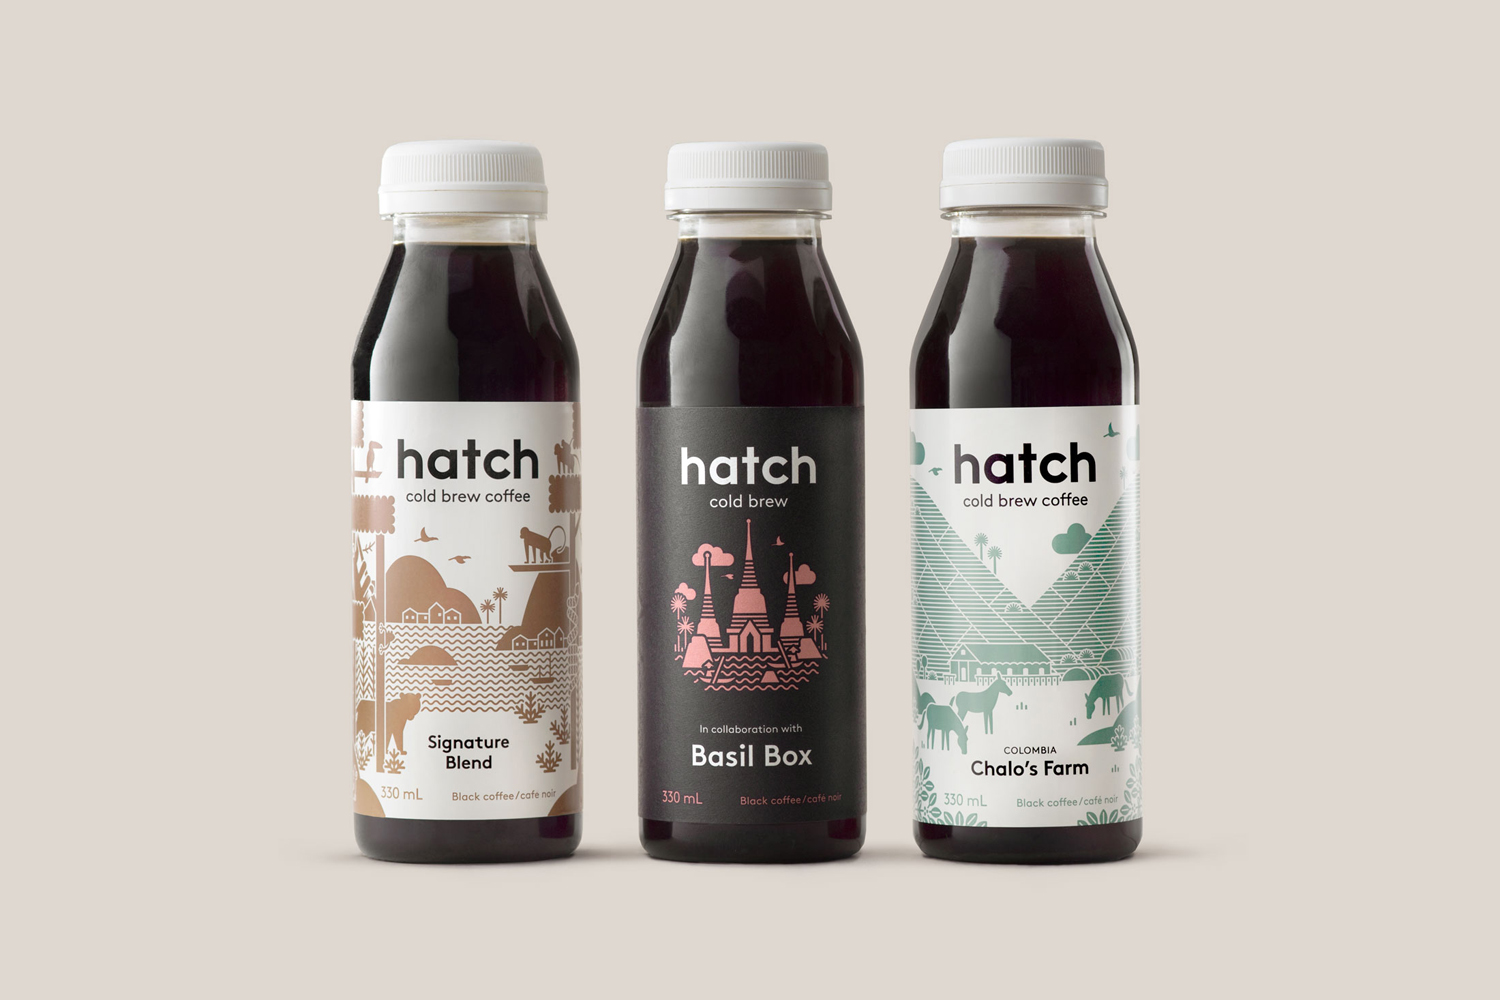 Illustration in Packaging Design – Hatch Cold Brew by Tung, Canada